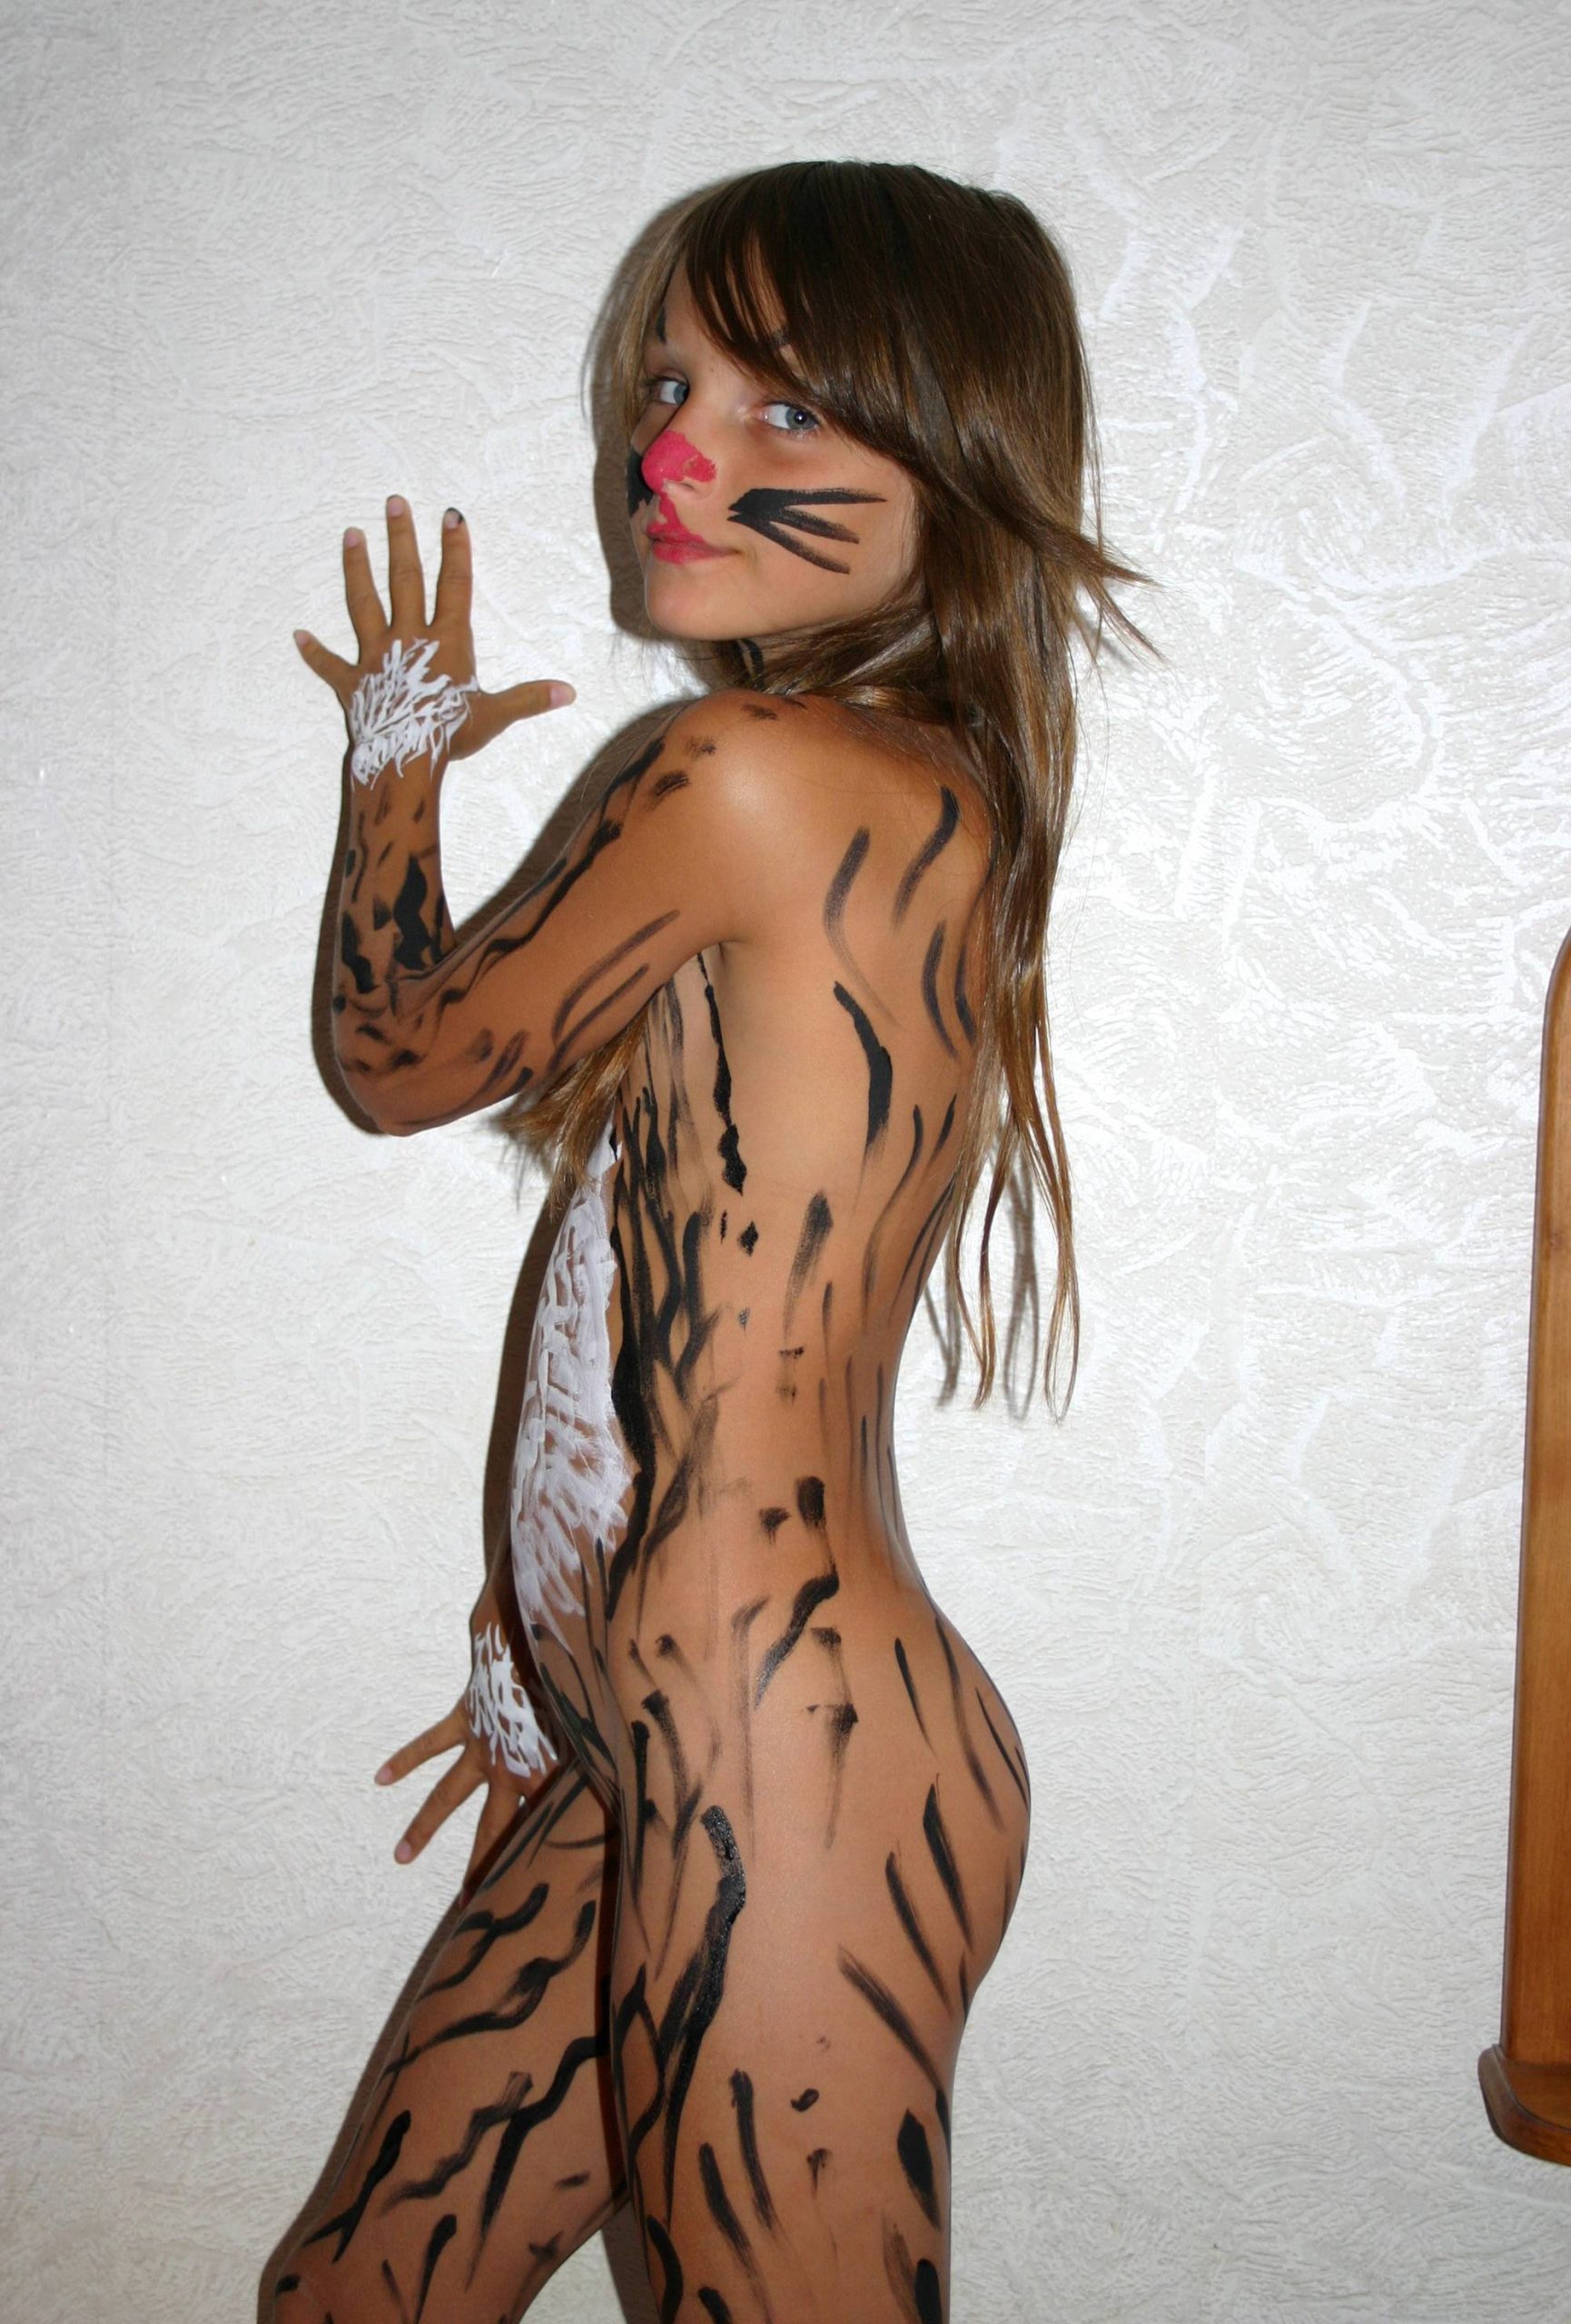 Purenudism Photos-Nude Tiger Paint and Colors - 1